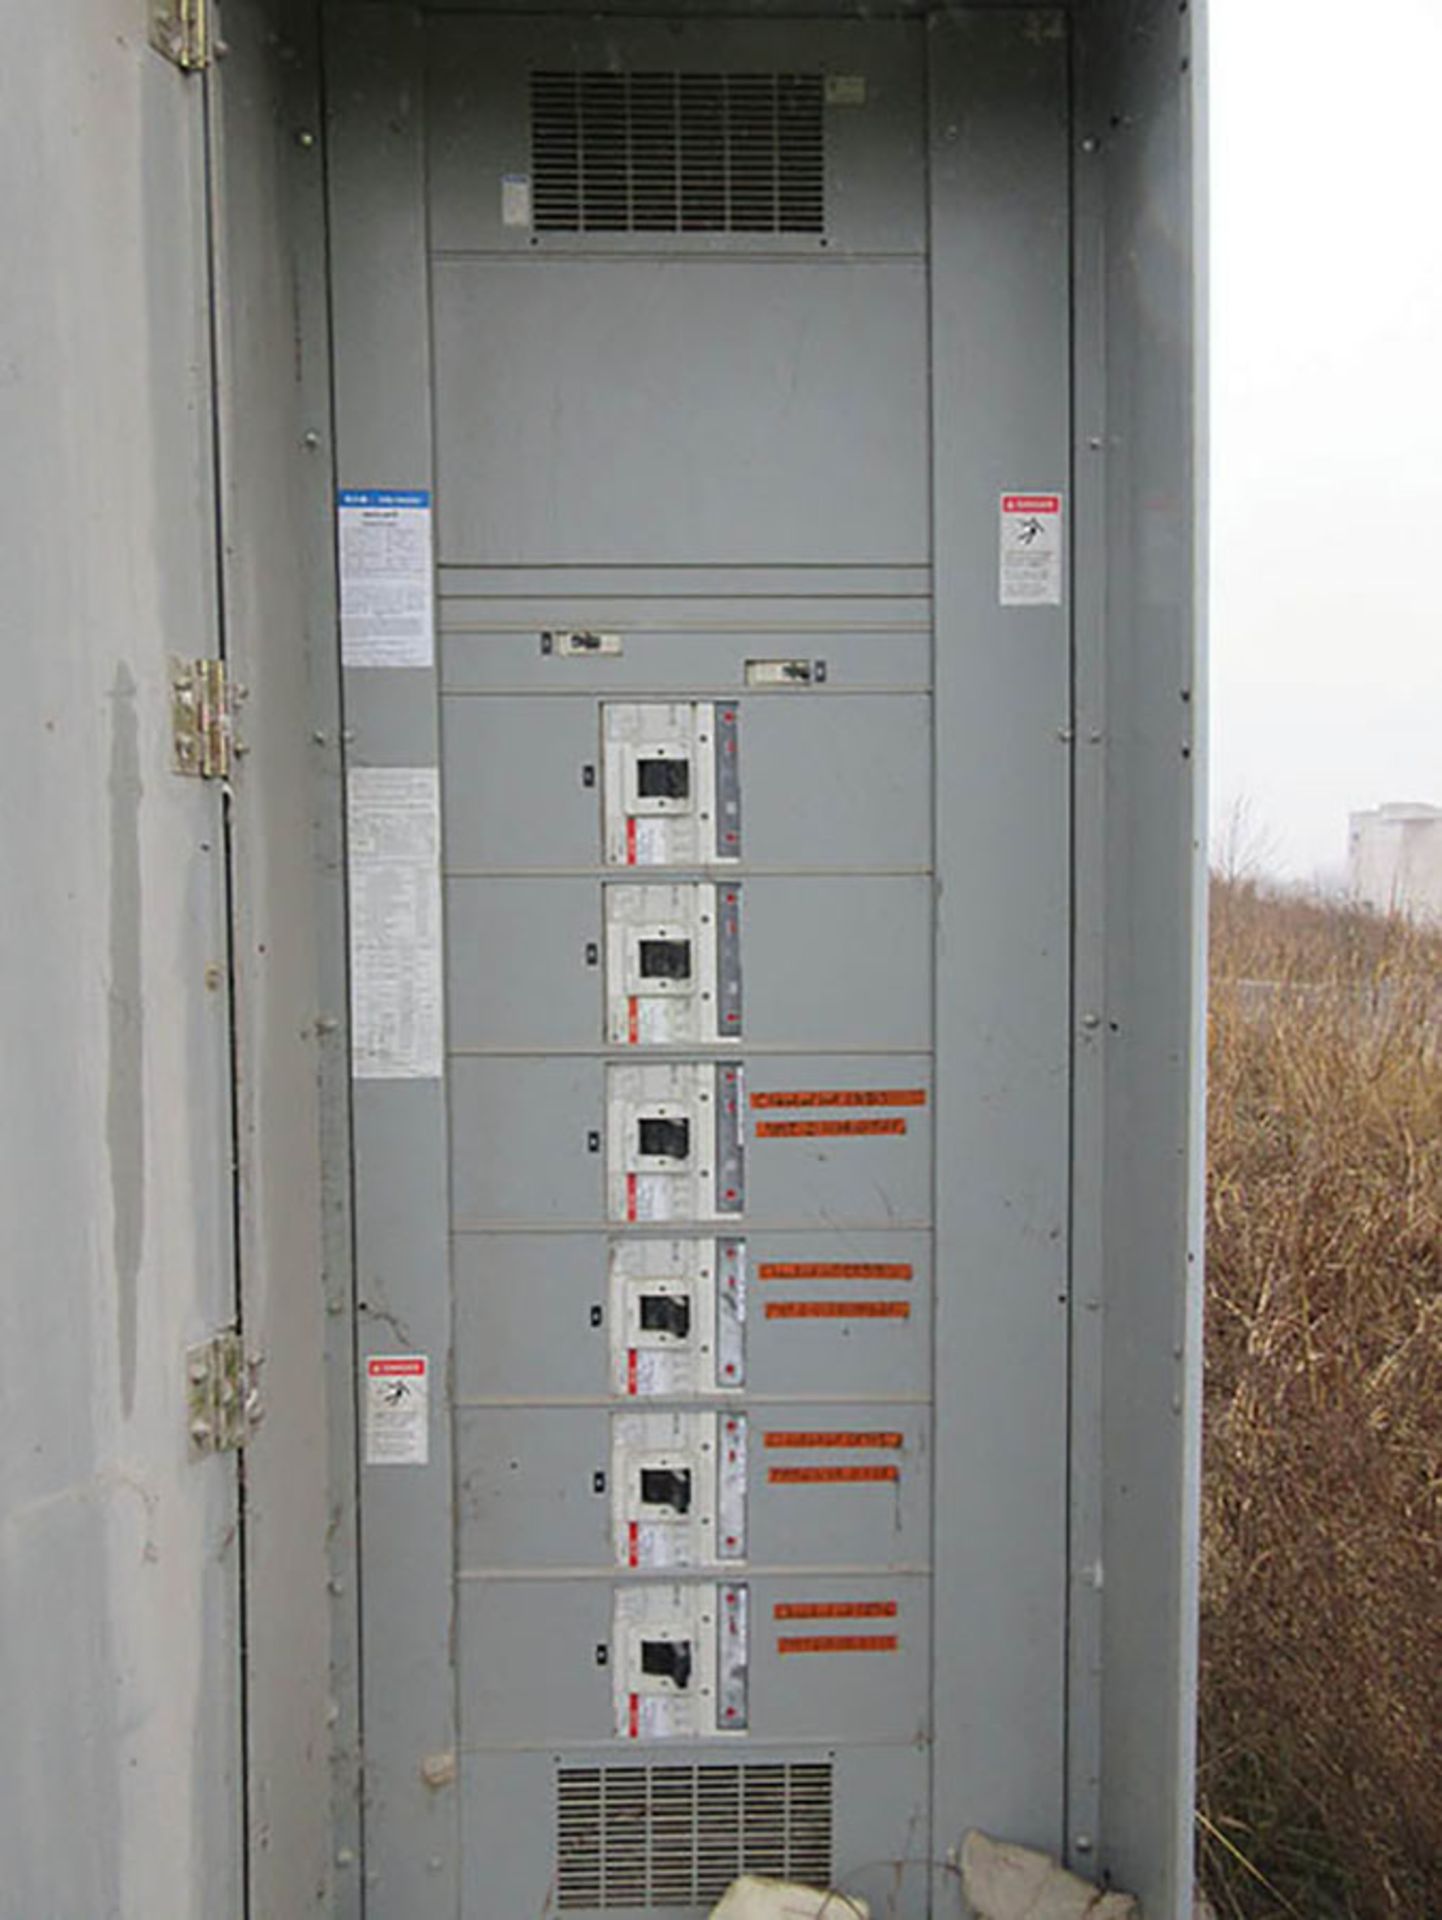 MAIN POWER SUPPLY EATON SWITCHBOARD, 480-VOLT - Image 2 of 3